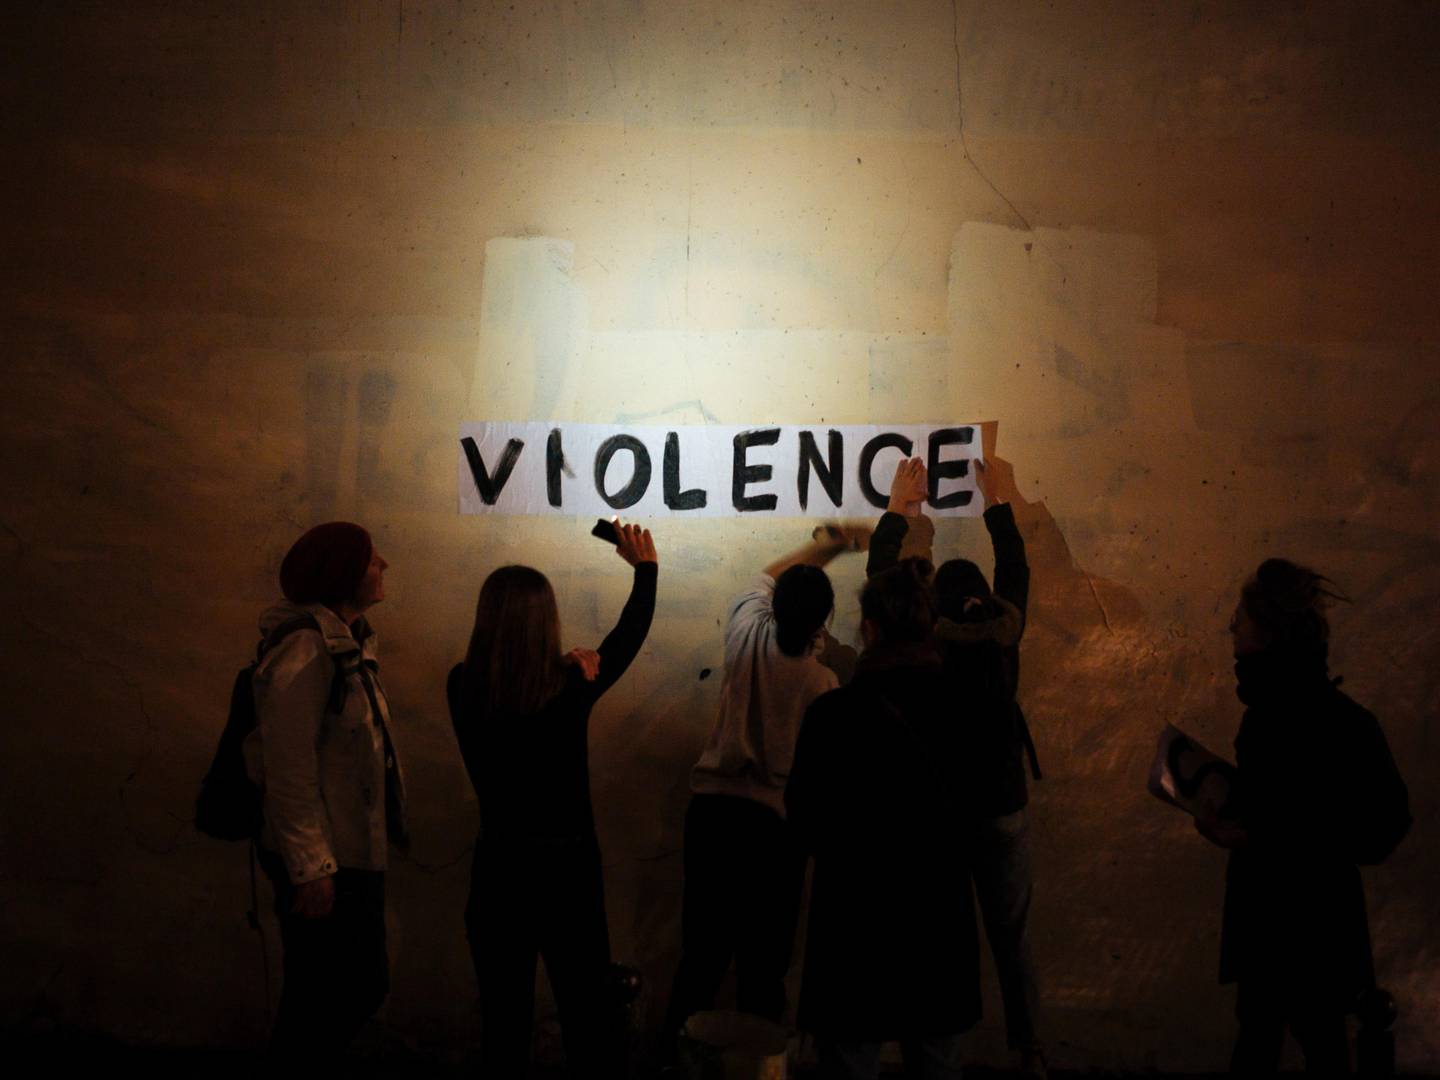 In this Oct. 31, 2019 photo, the word "violence" is pasted onto a wall by a group of women in a dark street in Paris. In Paris and cities across France, the signs are everywhere. "Complaints ignored, women killed" and "She leaves him, he kills her," they read in black block letters pasted over stately municipal buildings. Under cover of night, activists have glued them to the walls to draw attention to domestic violence, a problem French President Emmanuel Macron has called "France's shame." (AP Photo/Kamil Zihnioglu)